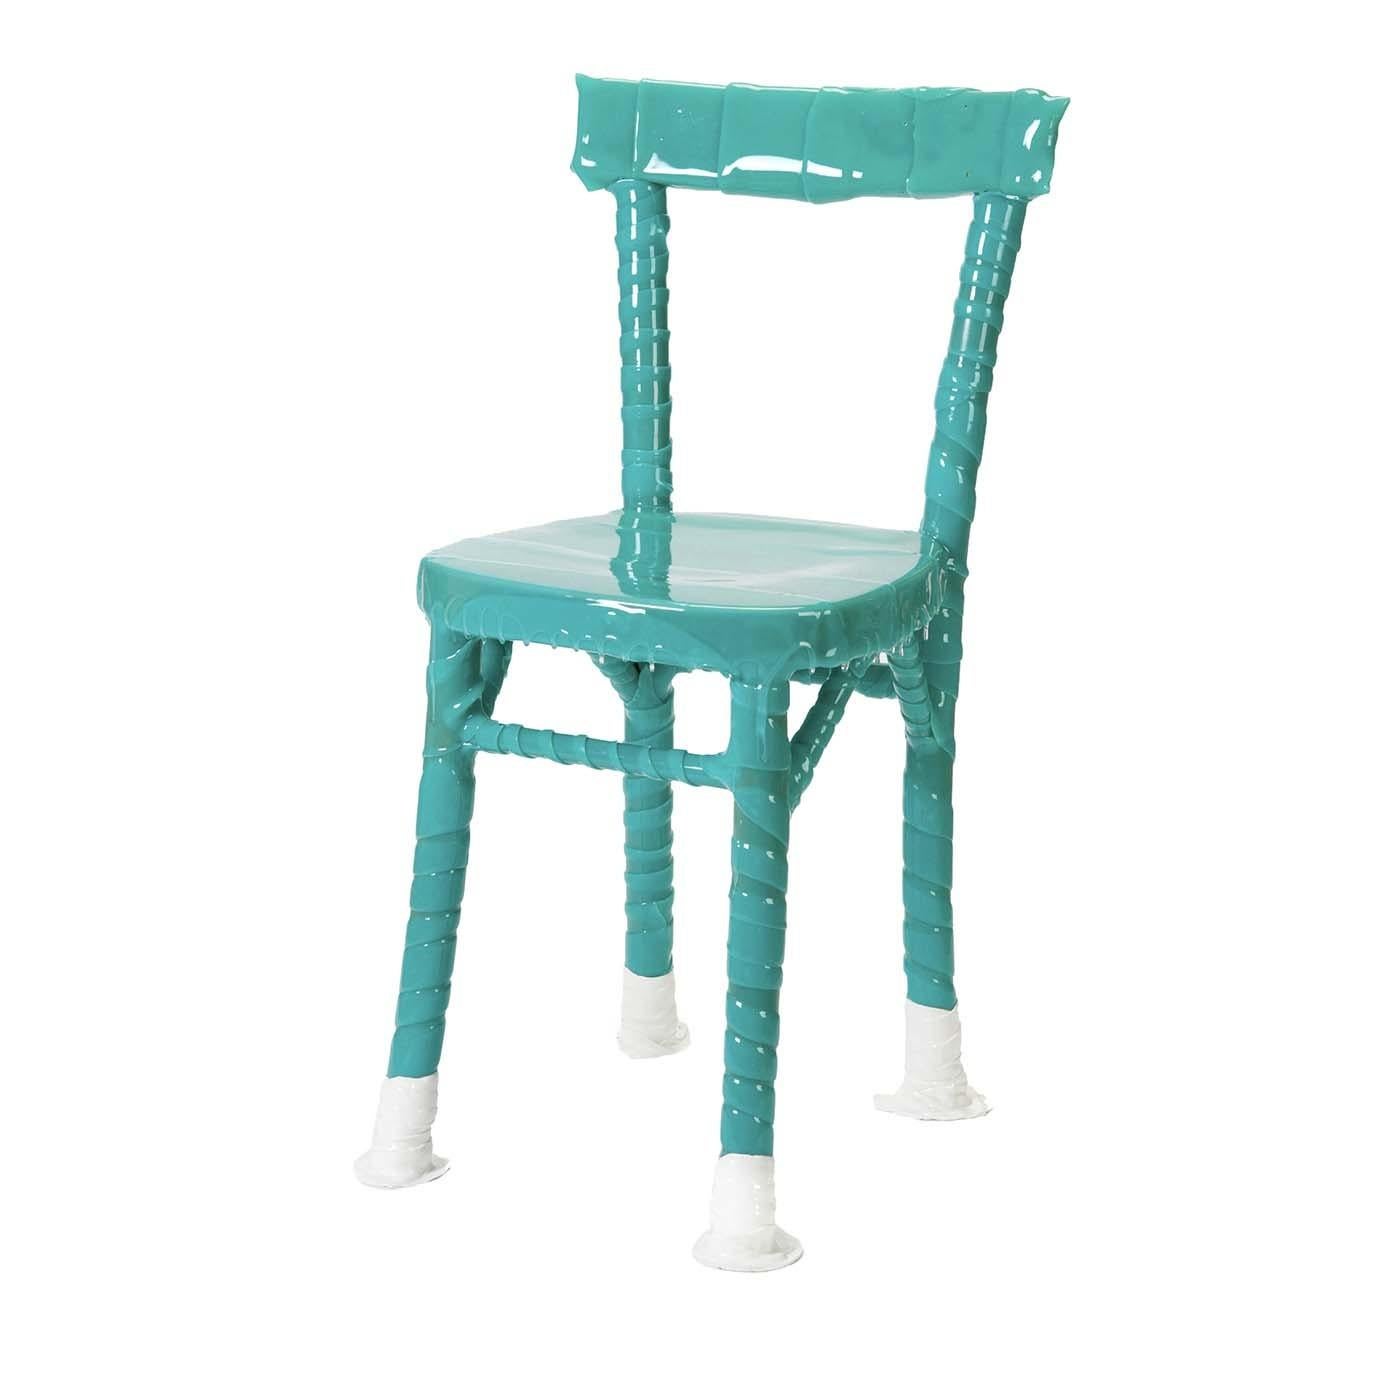 The One-Off Collection is part of the upcycling project: forgotten chairs, ignored or lying somewhere, are rediscovered after being wrapped in resin bandages by expert artisans. Each chair is very special, with bubbles and imperfections as an